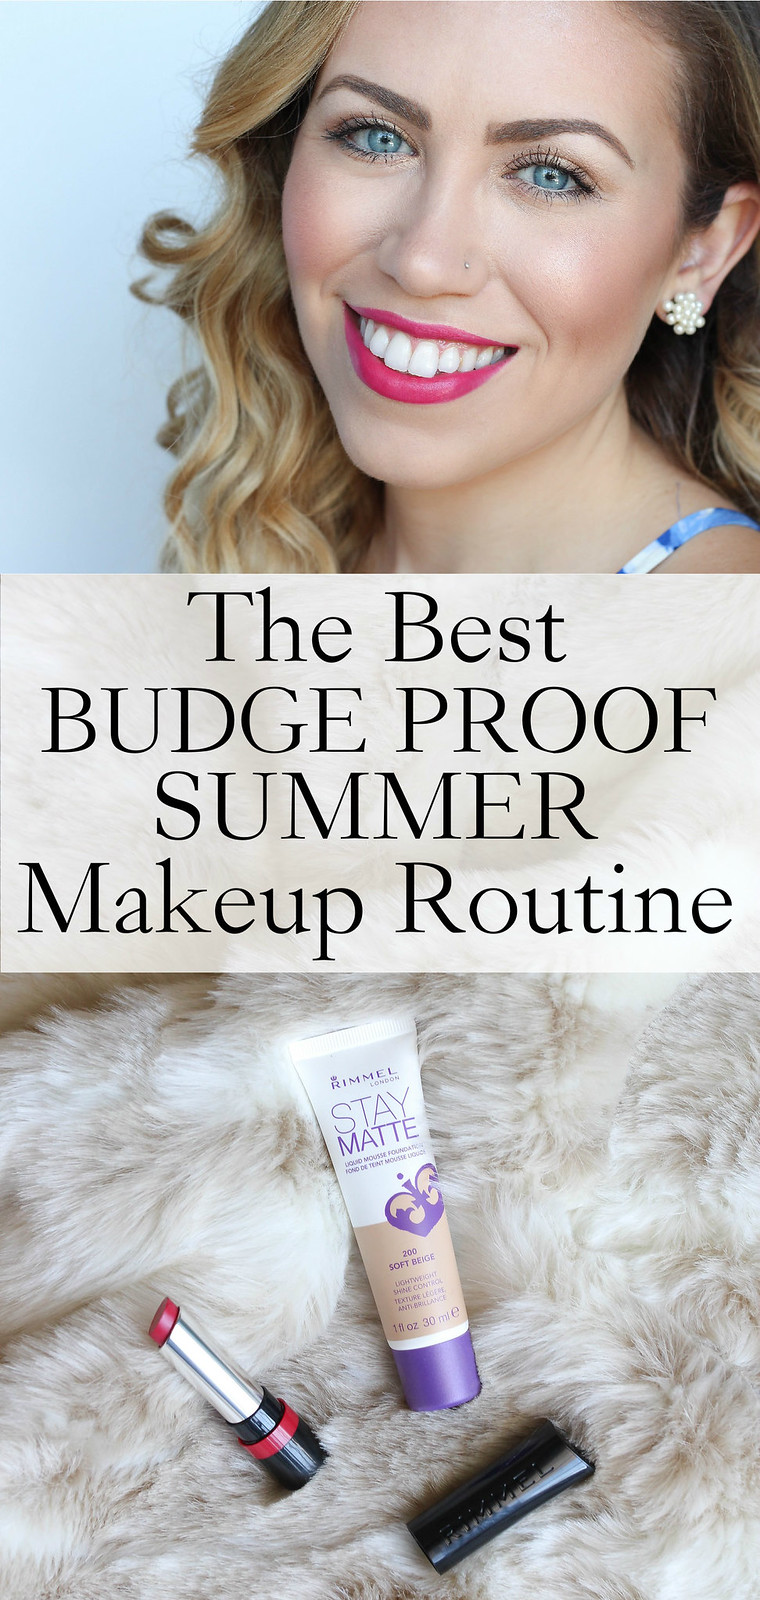 The Best Budge Proof Summer Makeup Routine with Rimmel London Stay Matte Foundation | Beauty Tutorial on Living After Midnite by Blogger Jackie Giardina